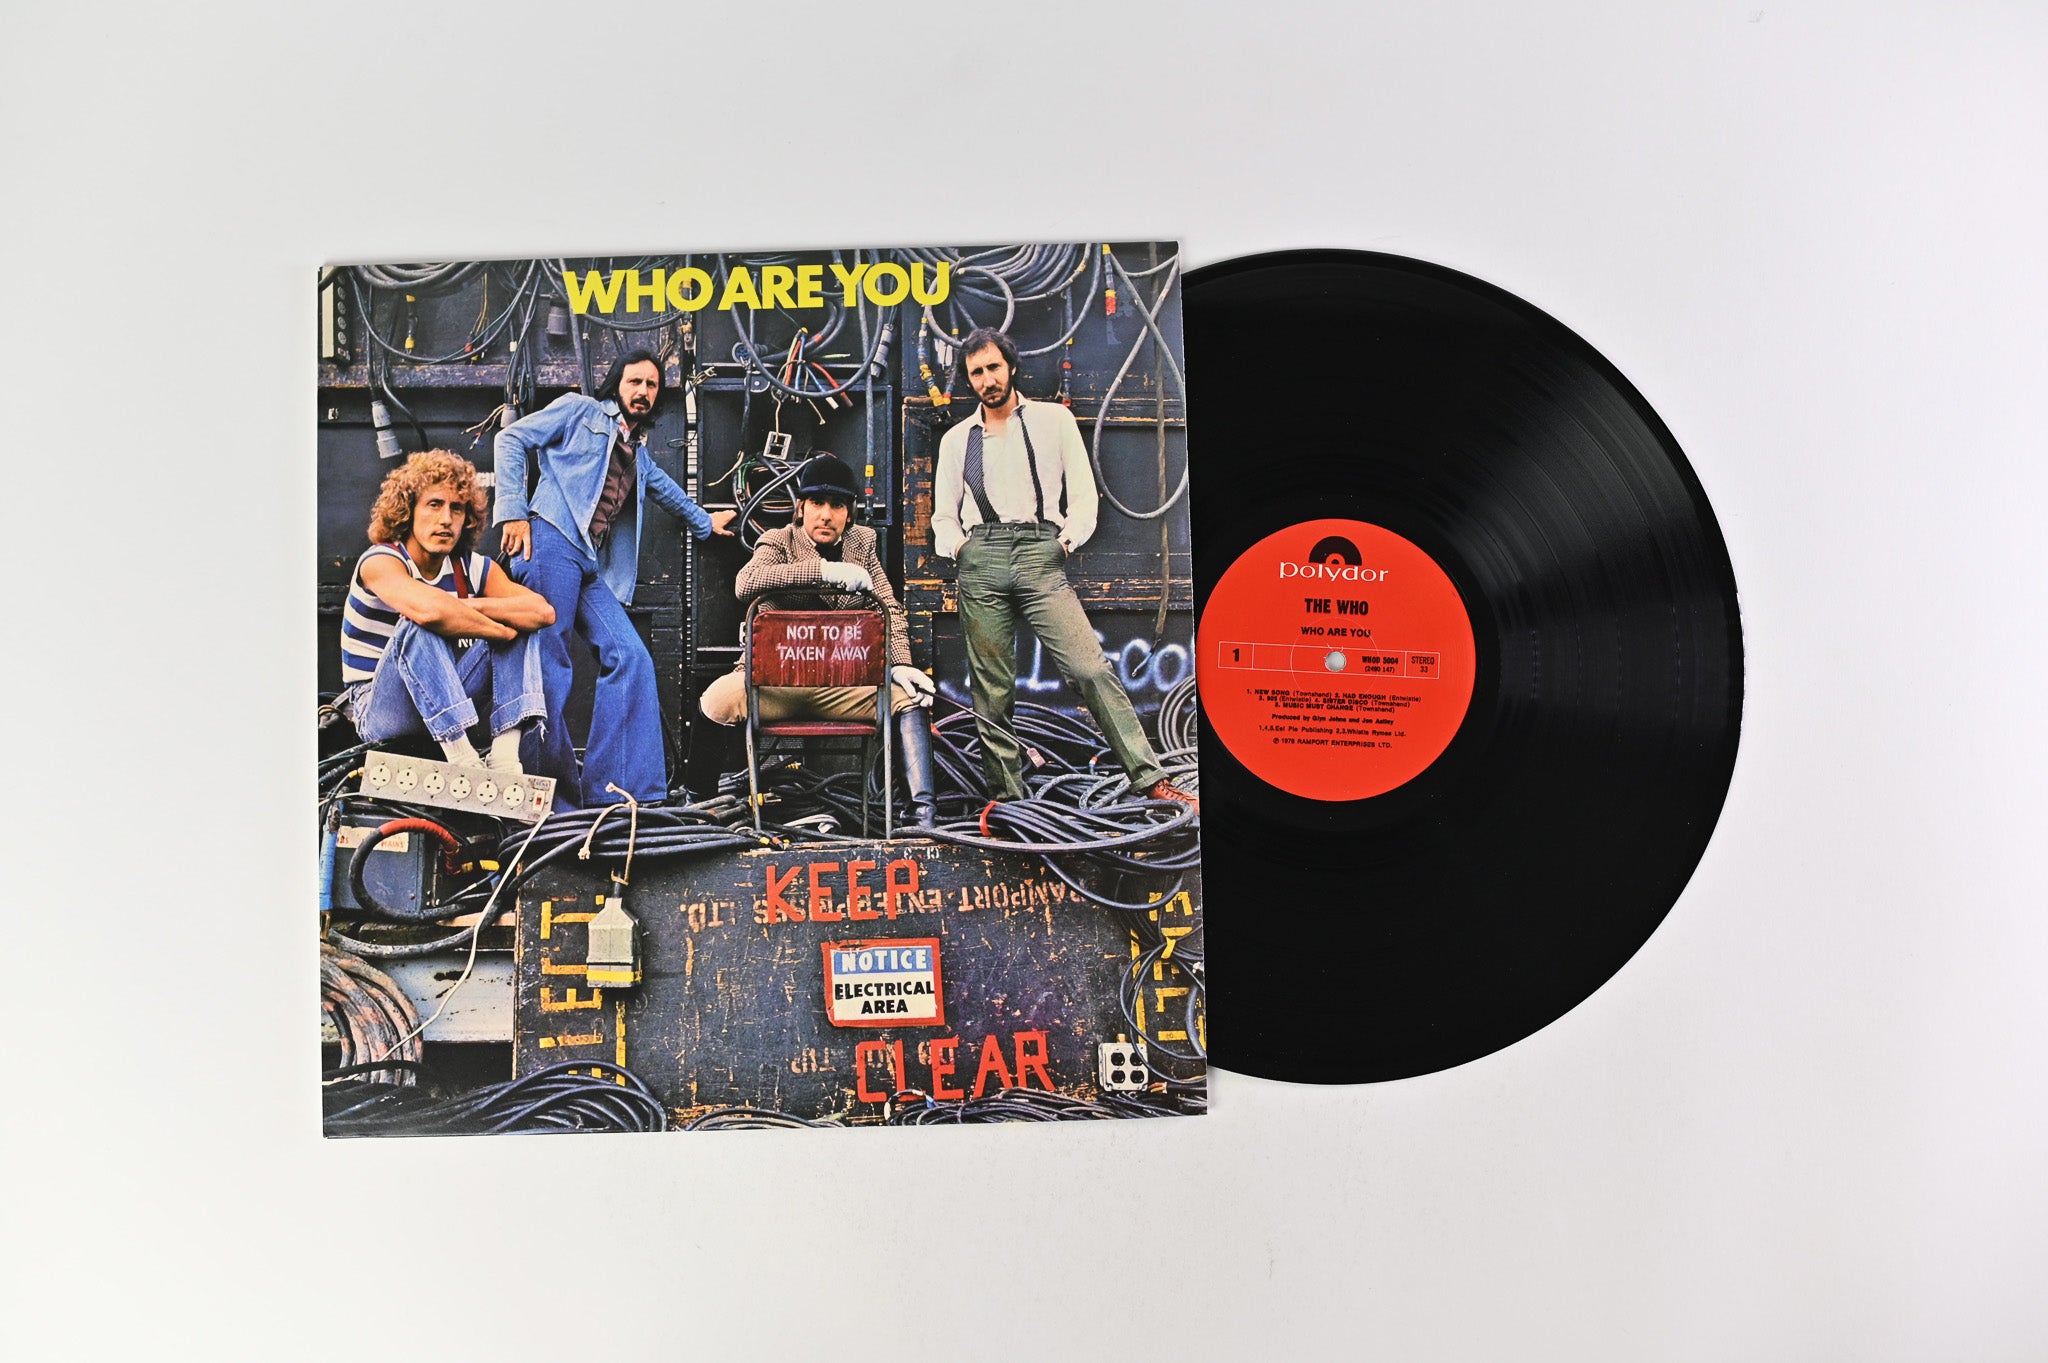 The Who - Who Are You Reissue on Polydor/Classic Records 200g